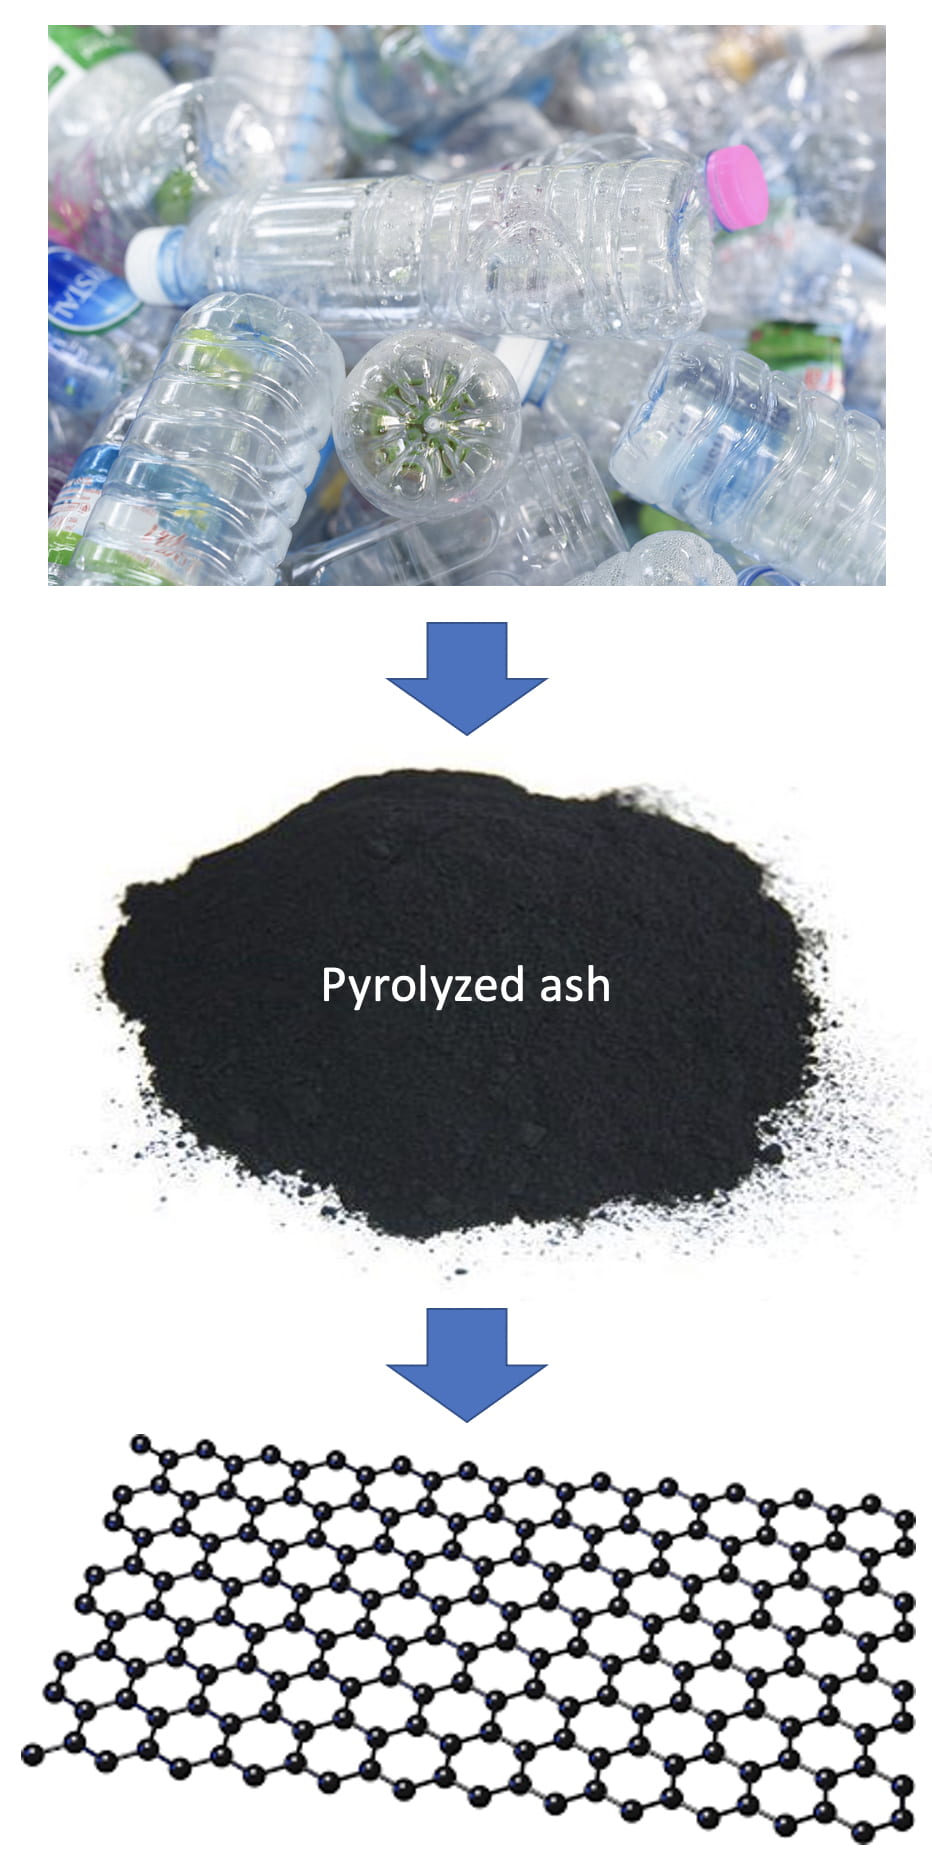 Rice University chemists turned otherwise-worthless pyrolyzed ash from plastic recycling into graphene through a Joule heating process